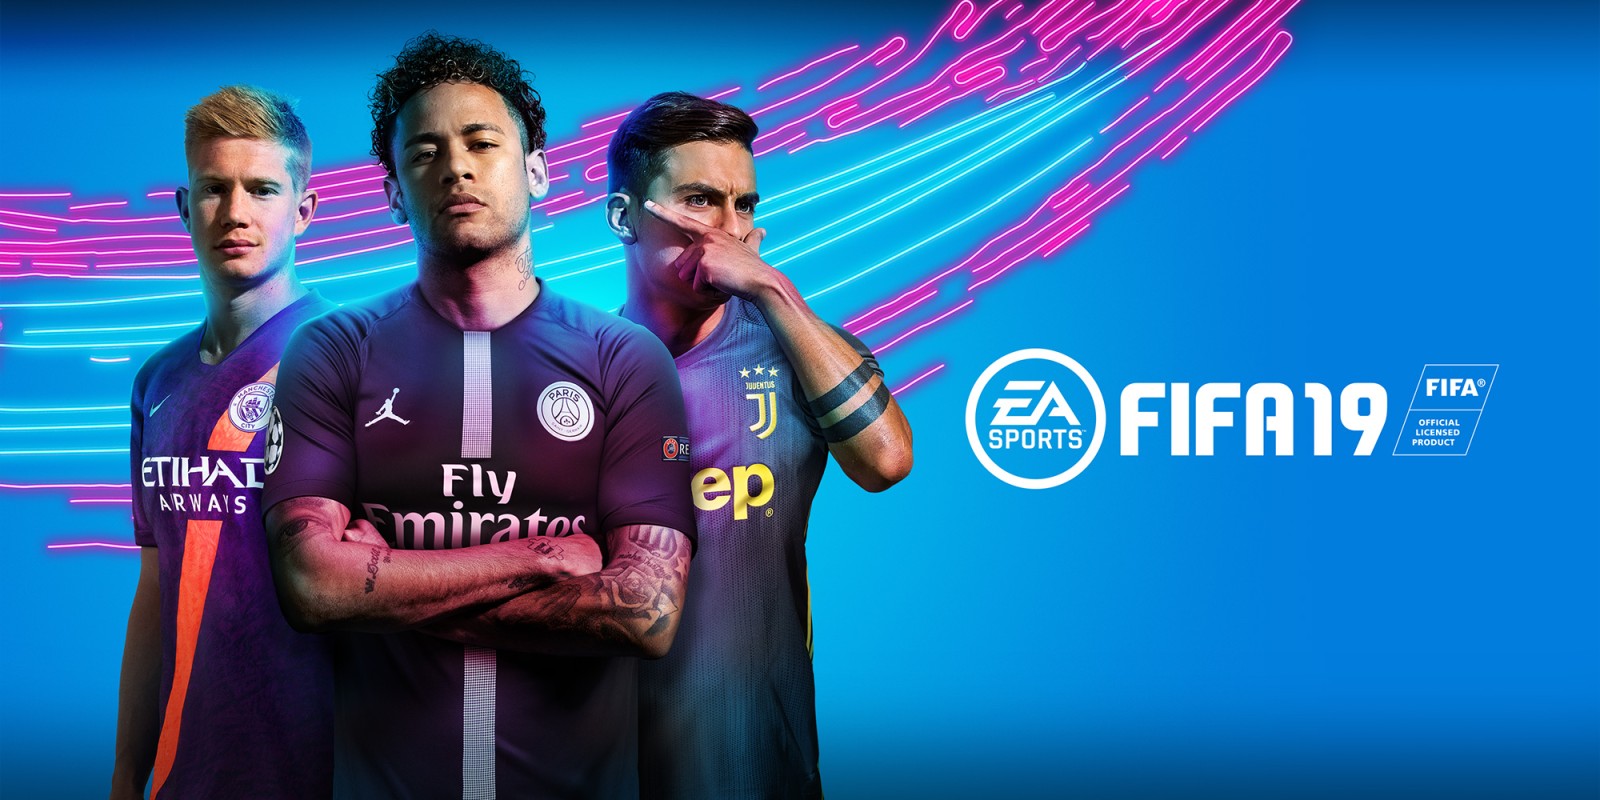 fifa 20 exe download